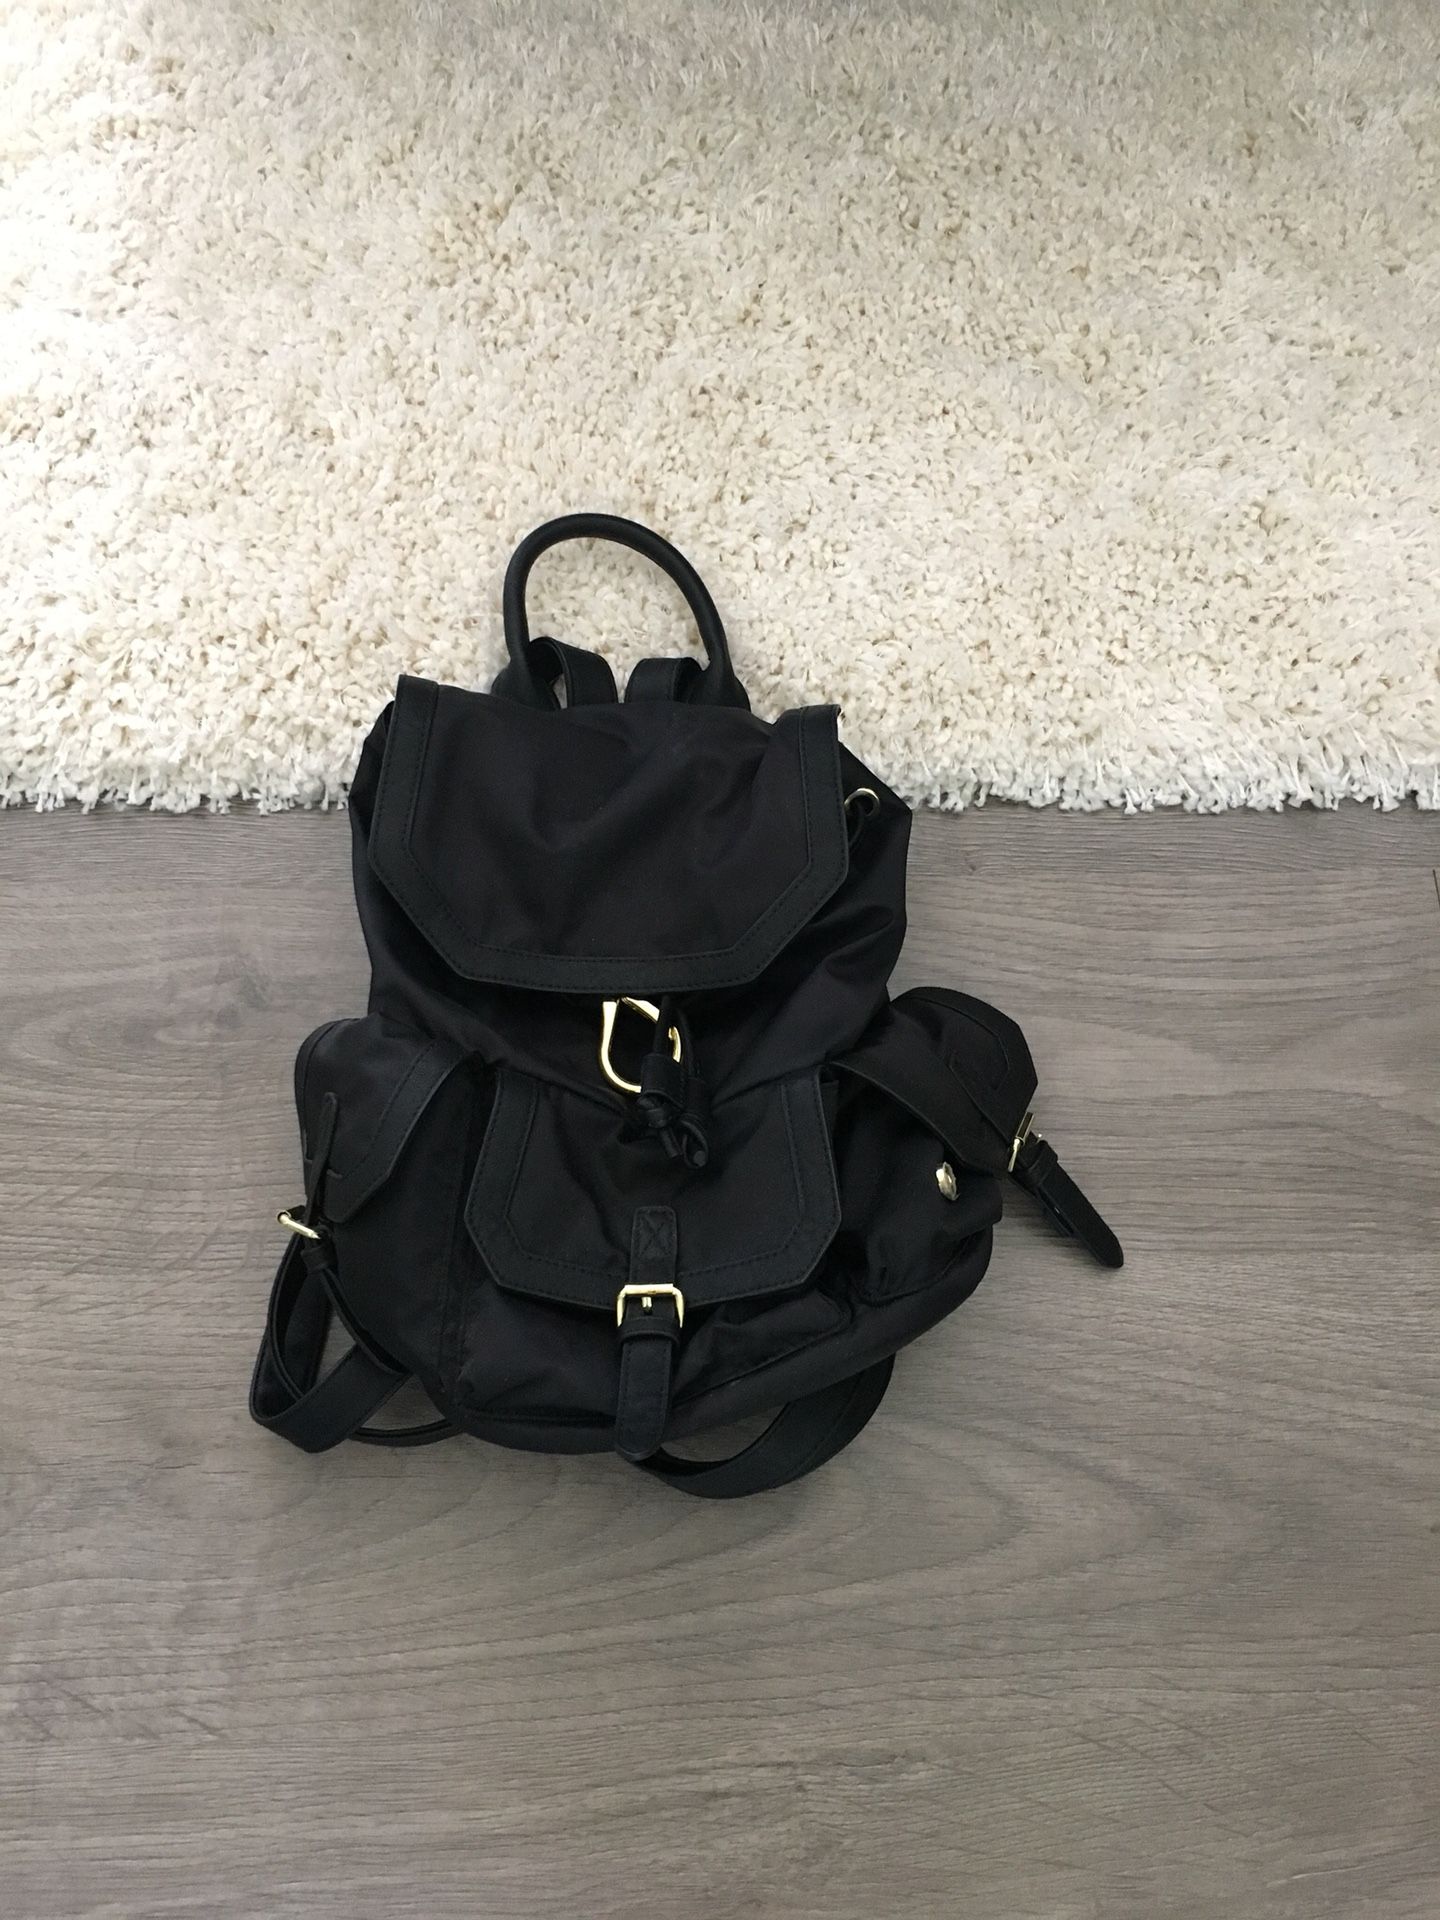 Small vacation backpack - Steve Madden